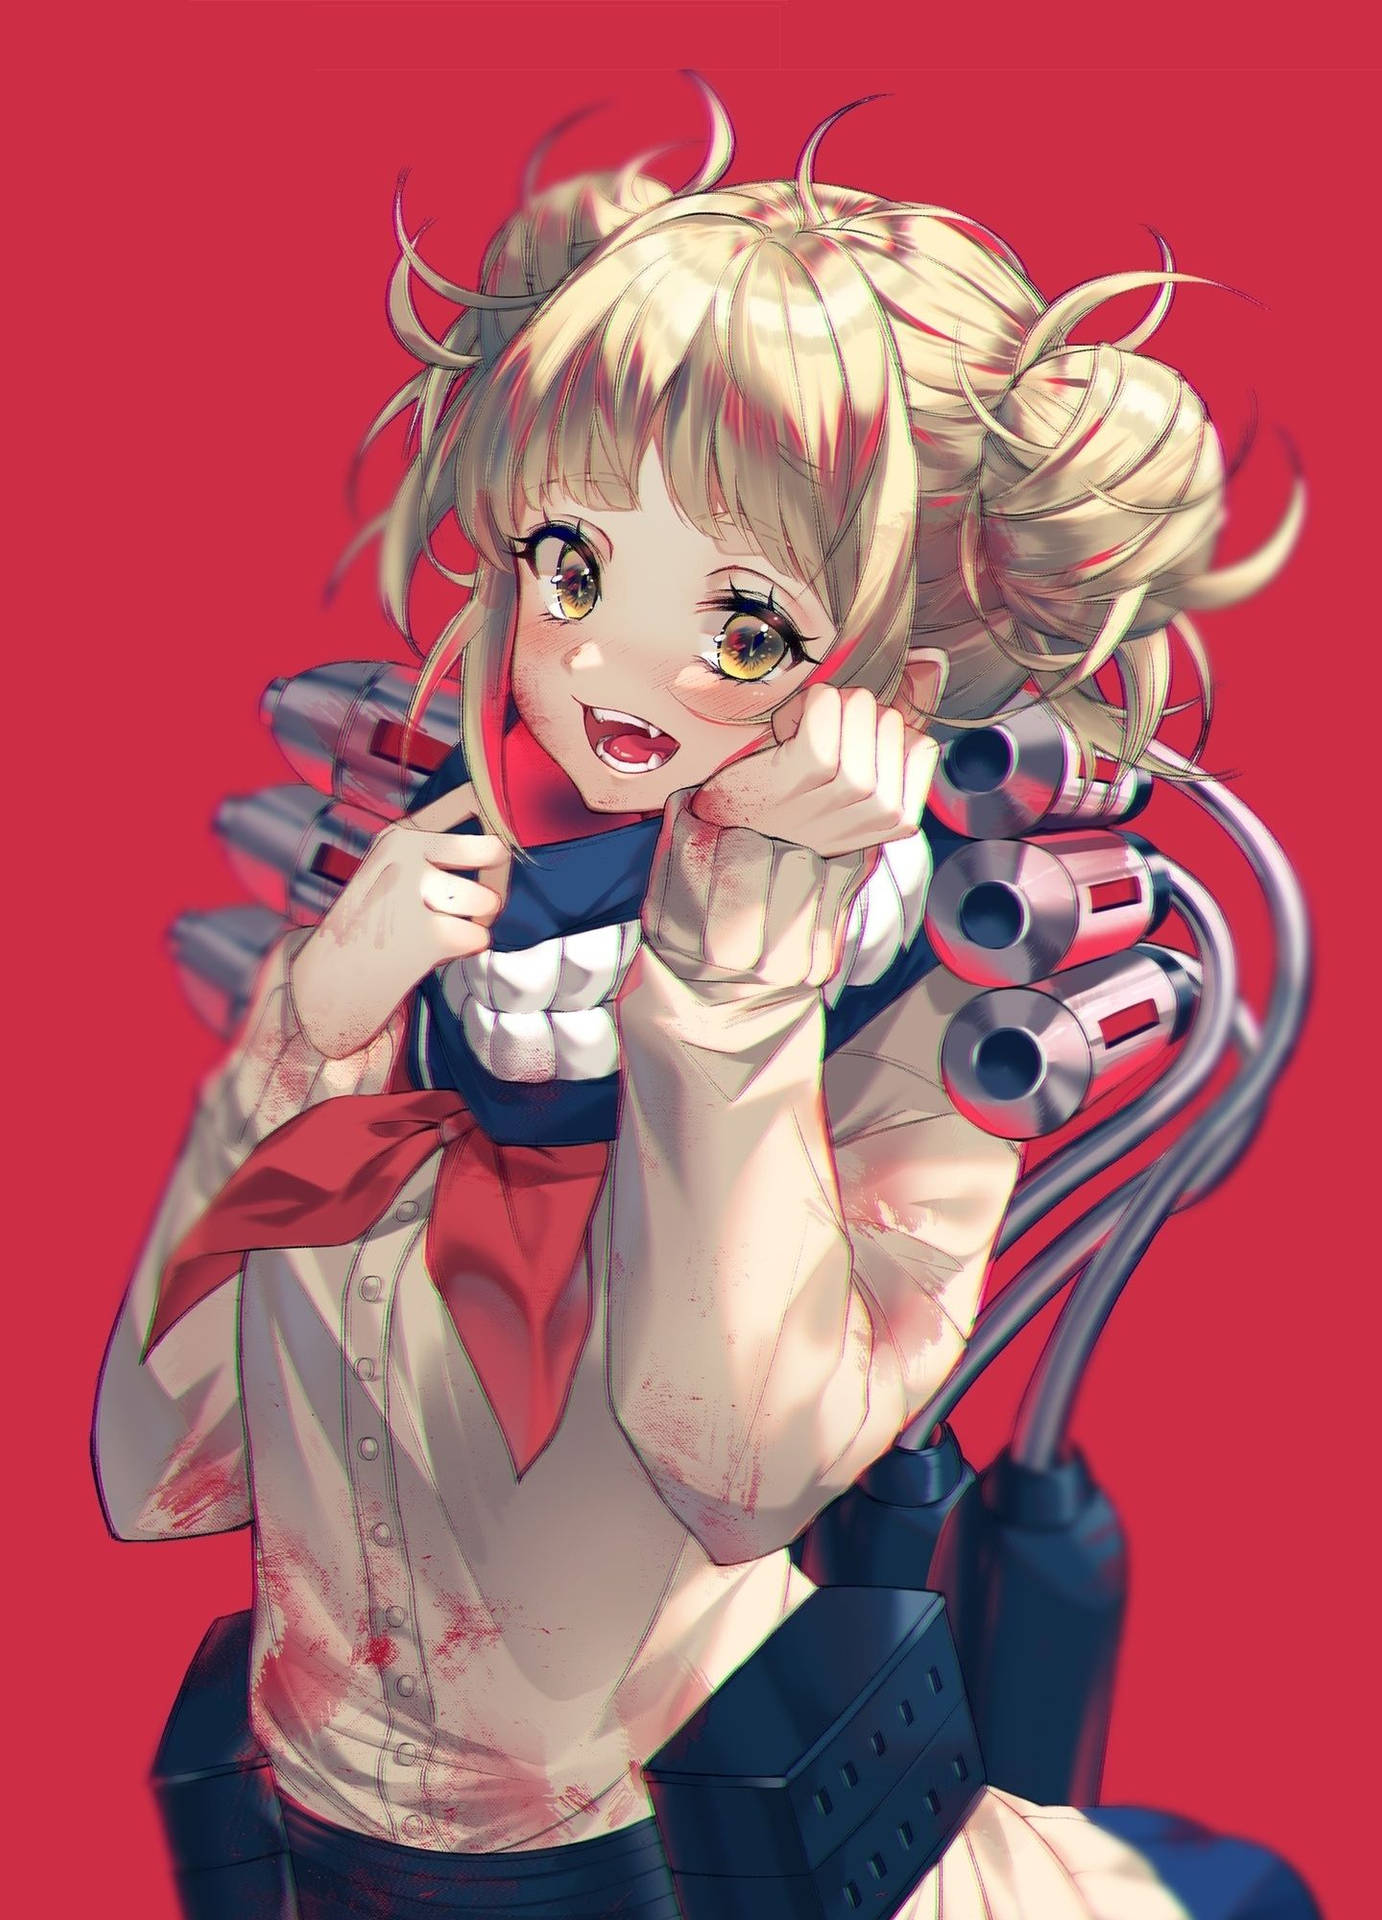 1440X2000 Himiko Toga Wallpaper and Background